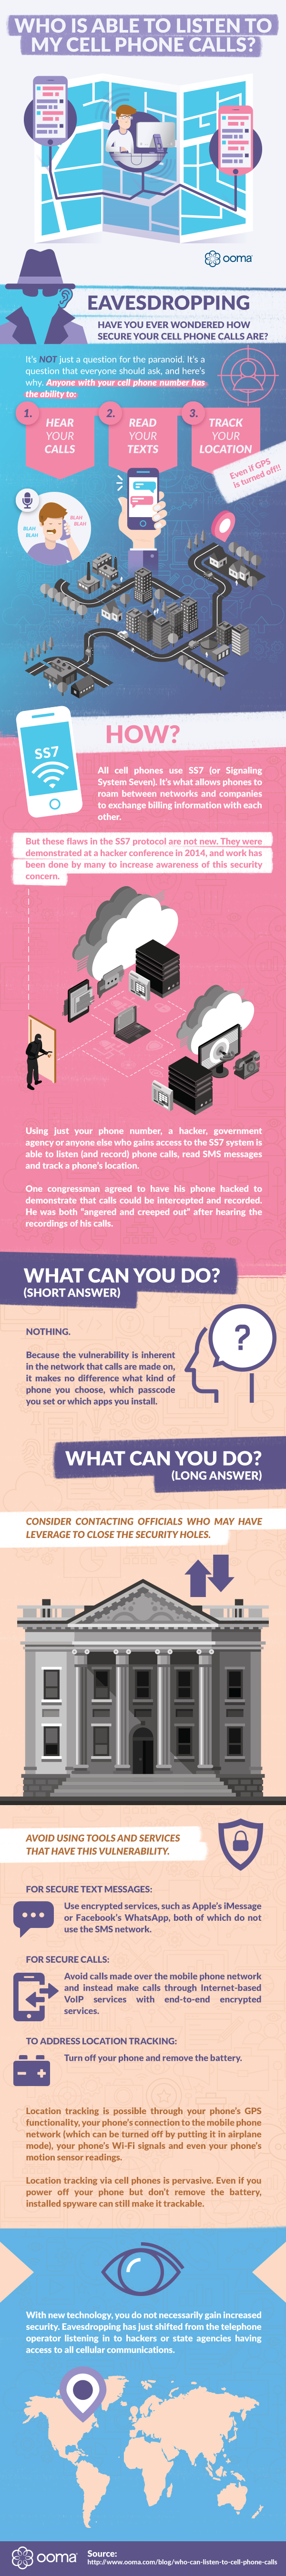 How Can Startups Make a Gig Out of the Phone Security Industry [Infographic]